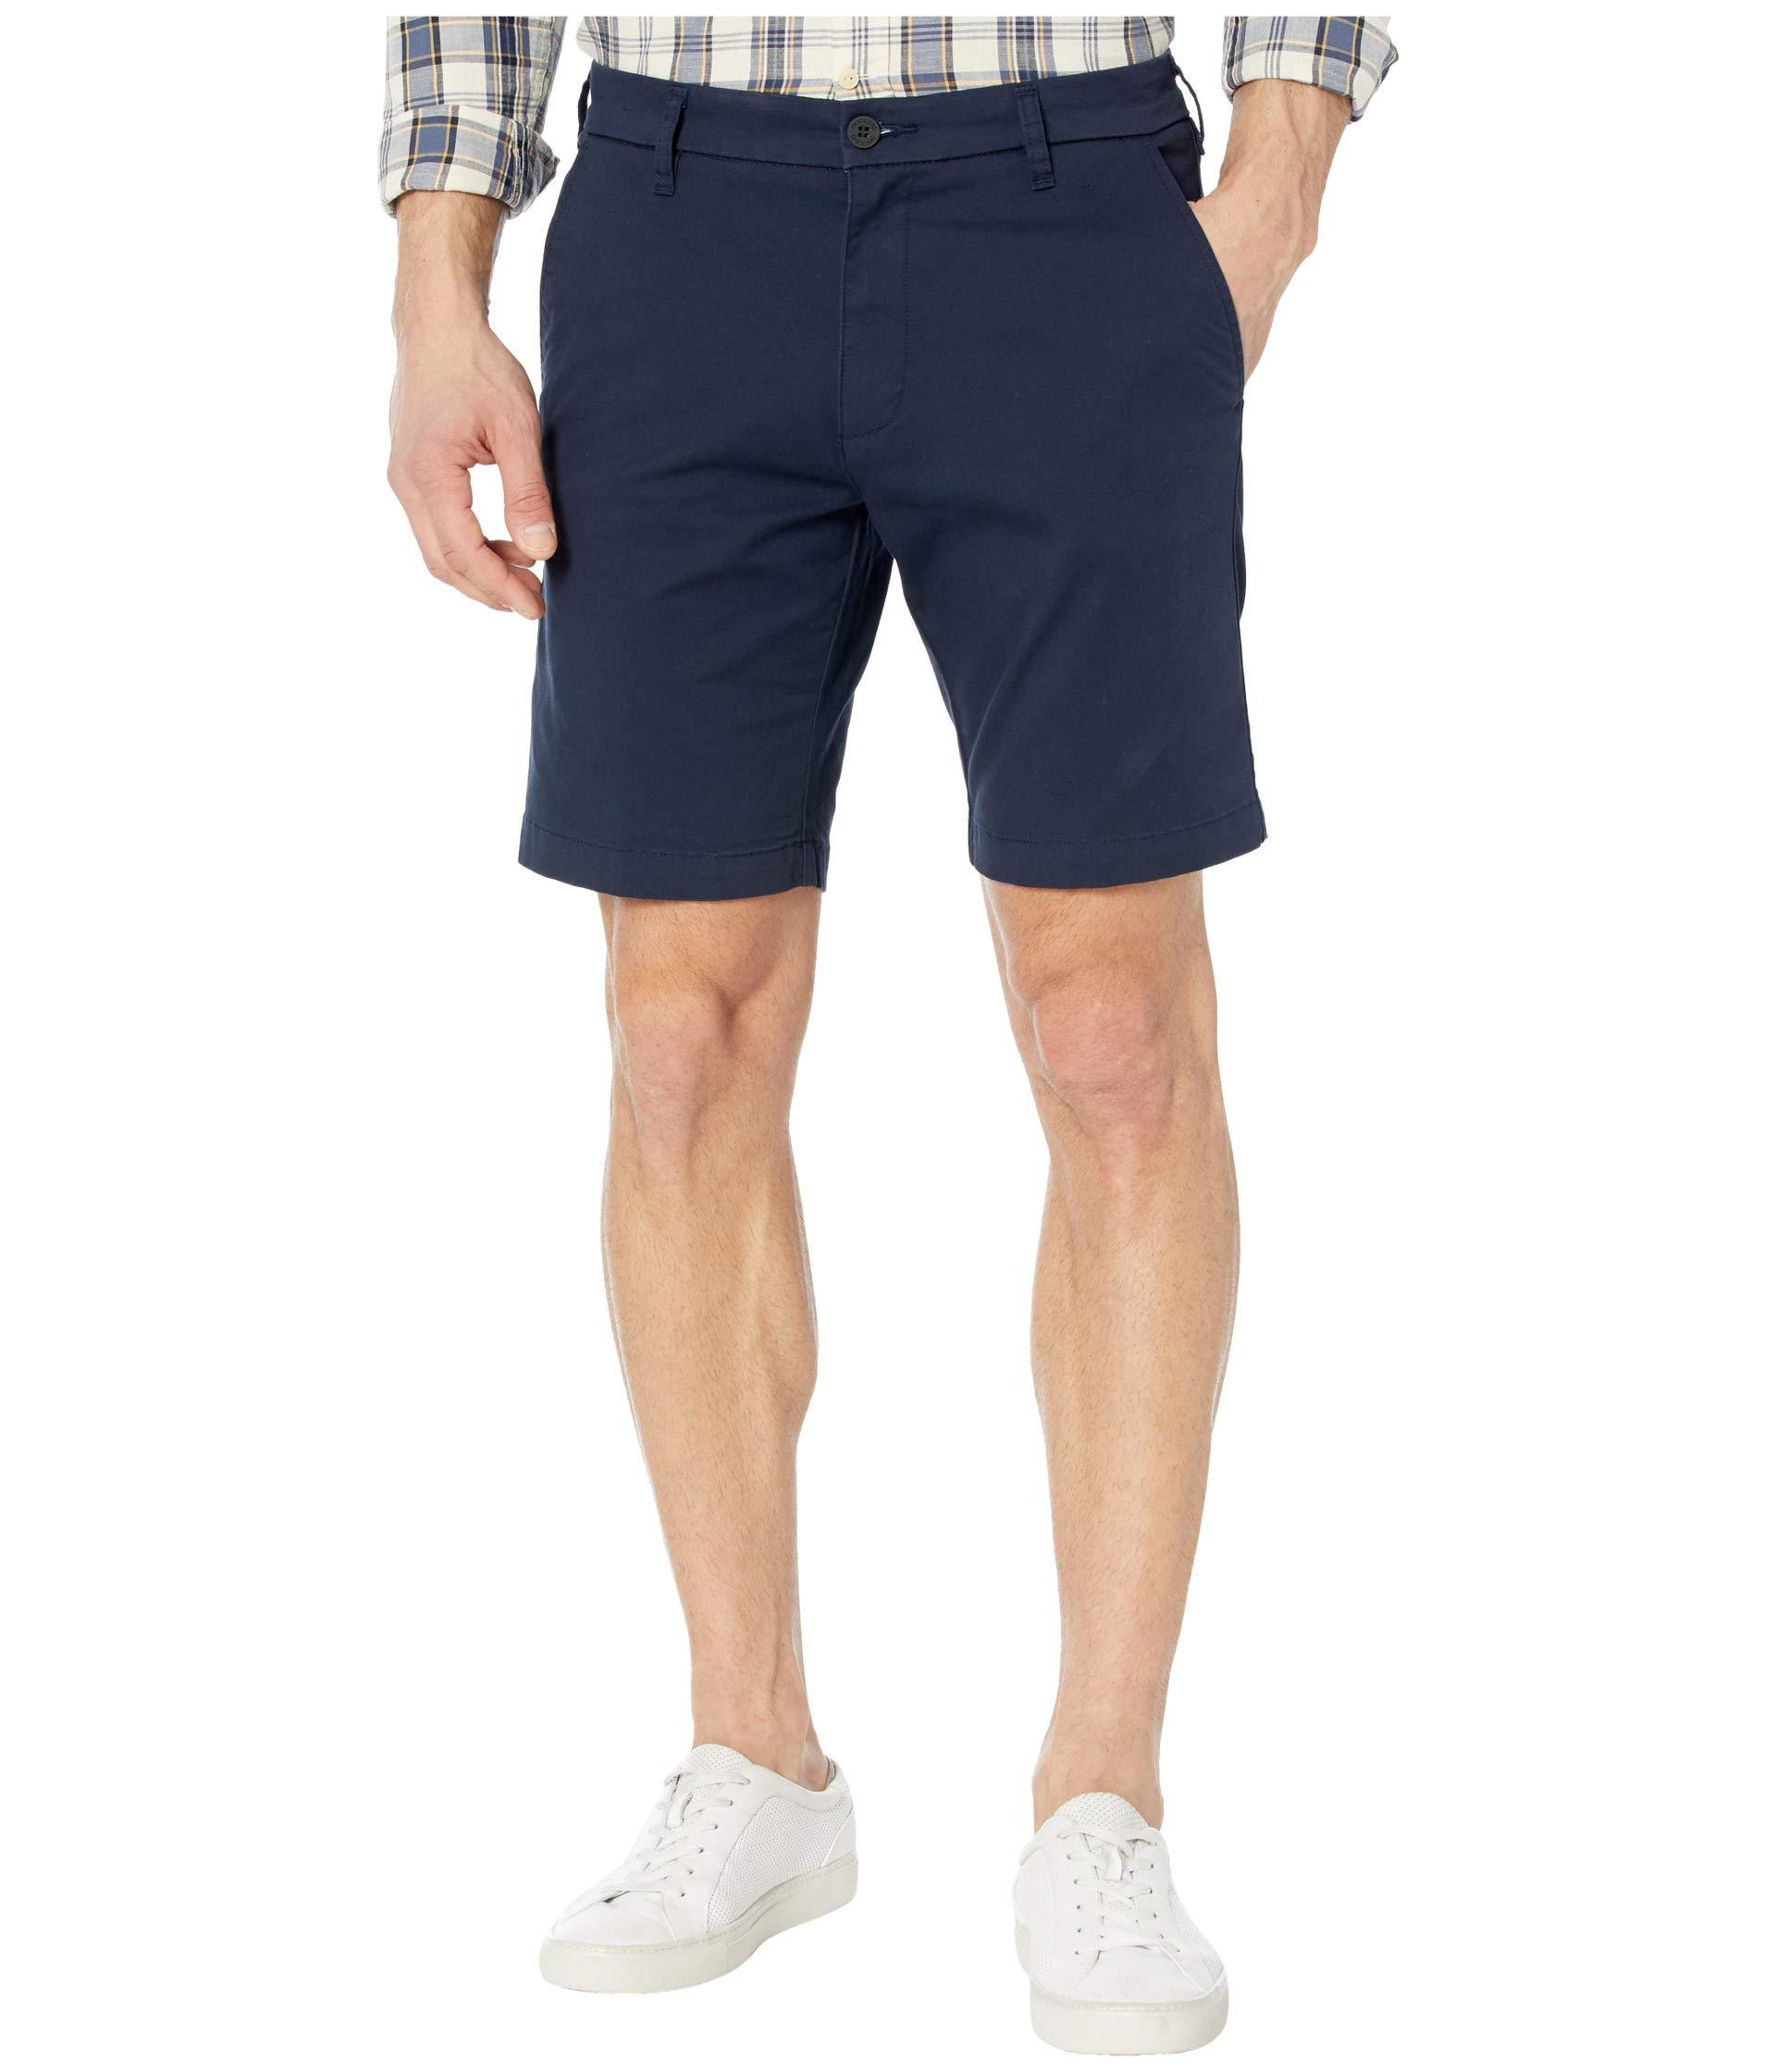 Dockers Cotton Supreme Flex Ultimate Shorts in White for Men - Lyst